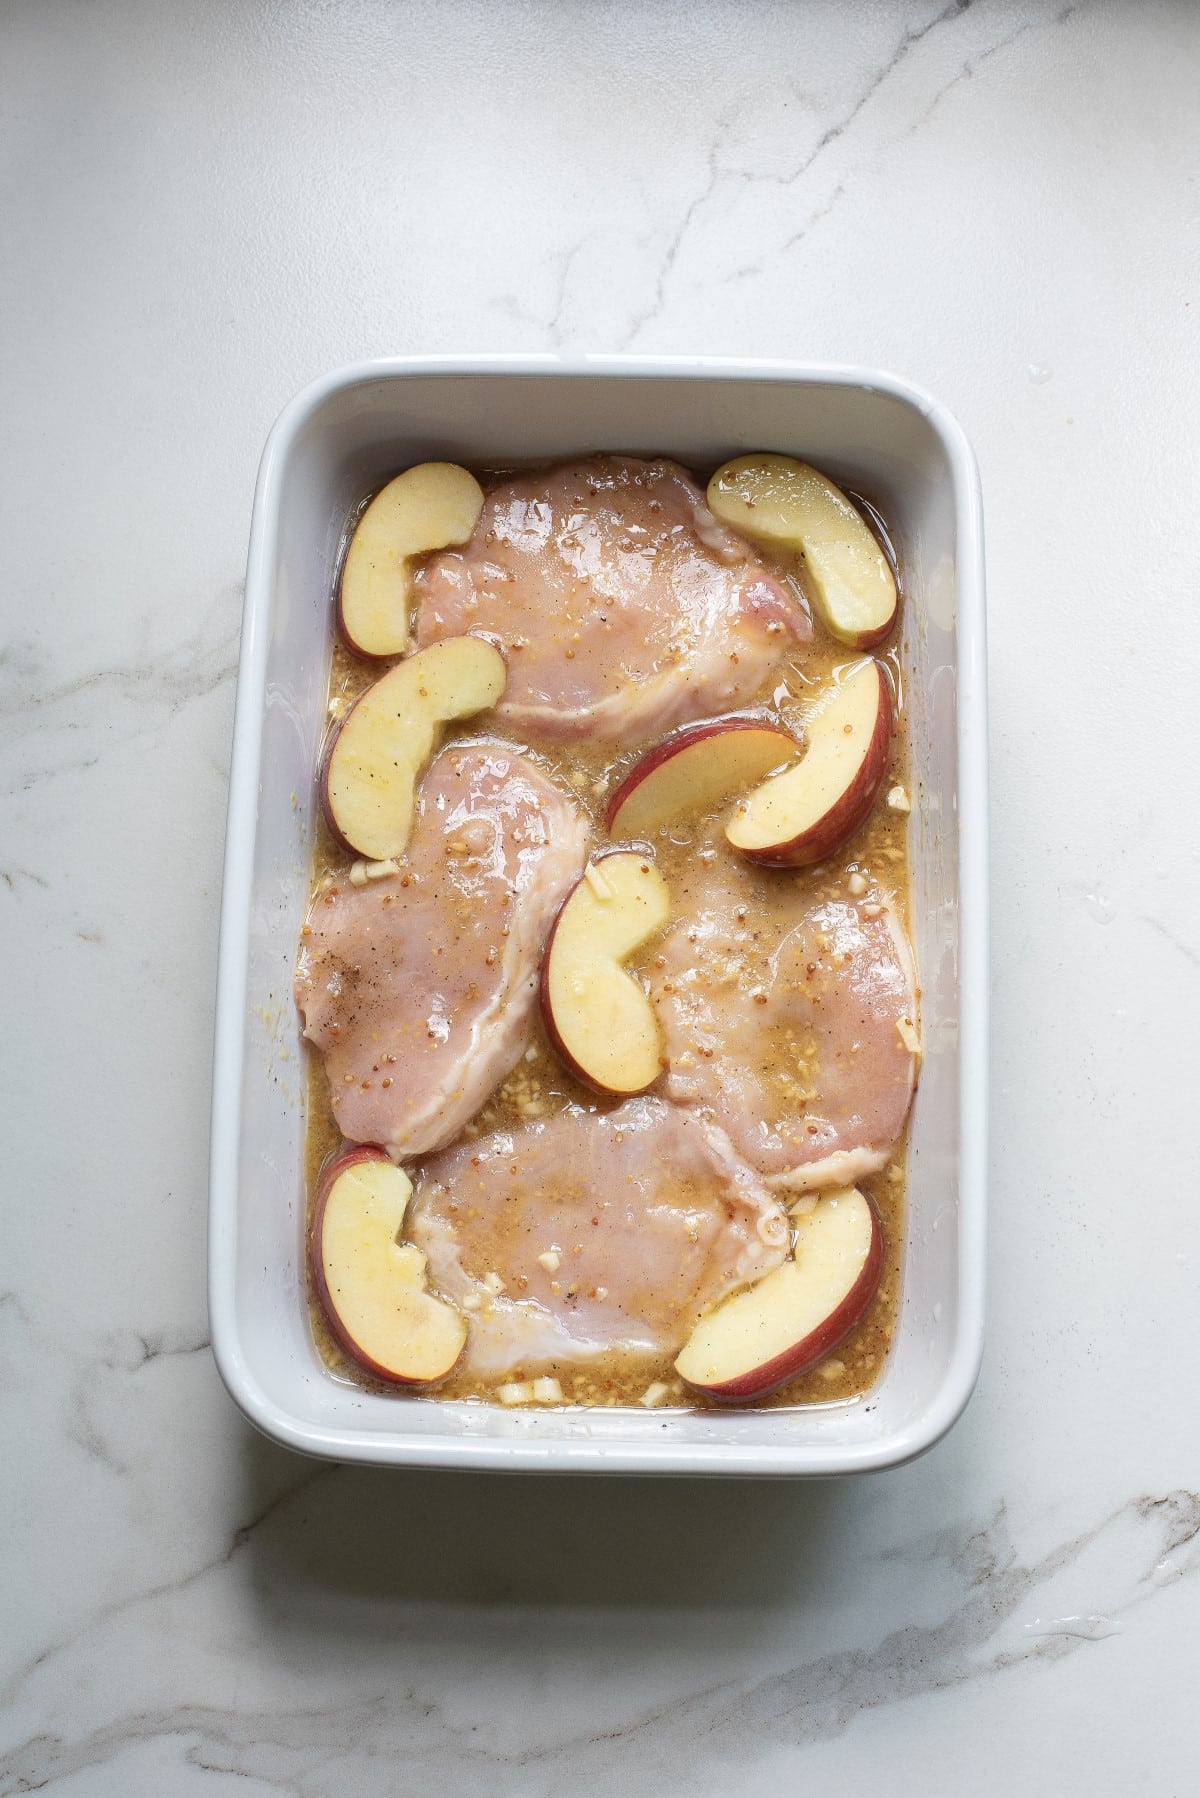 Apples and pork chops ready for the oven. 